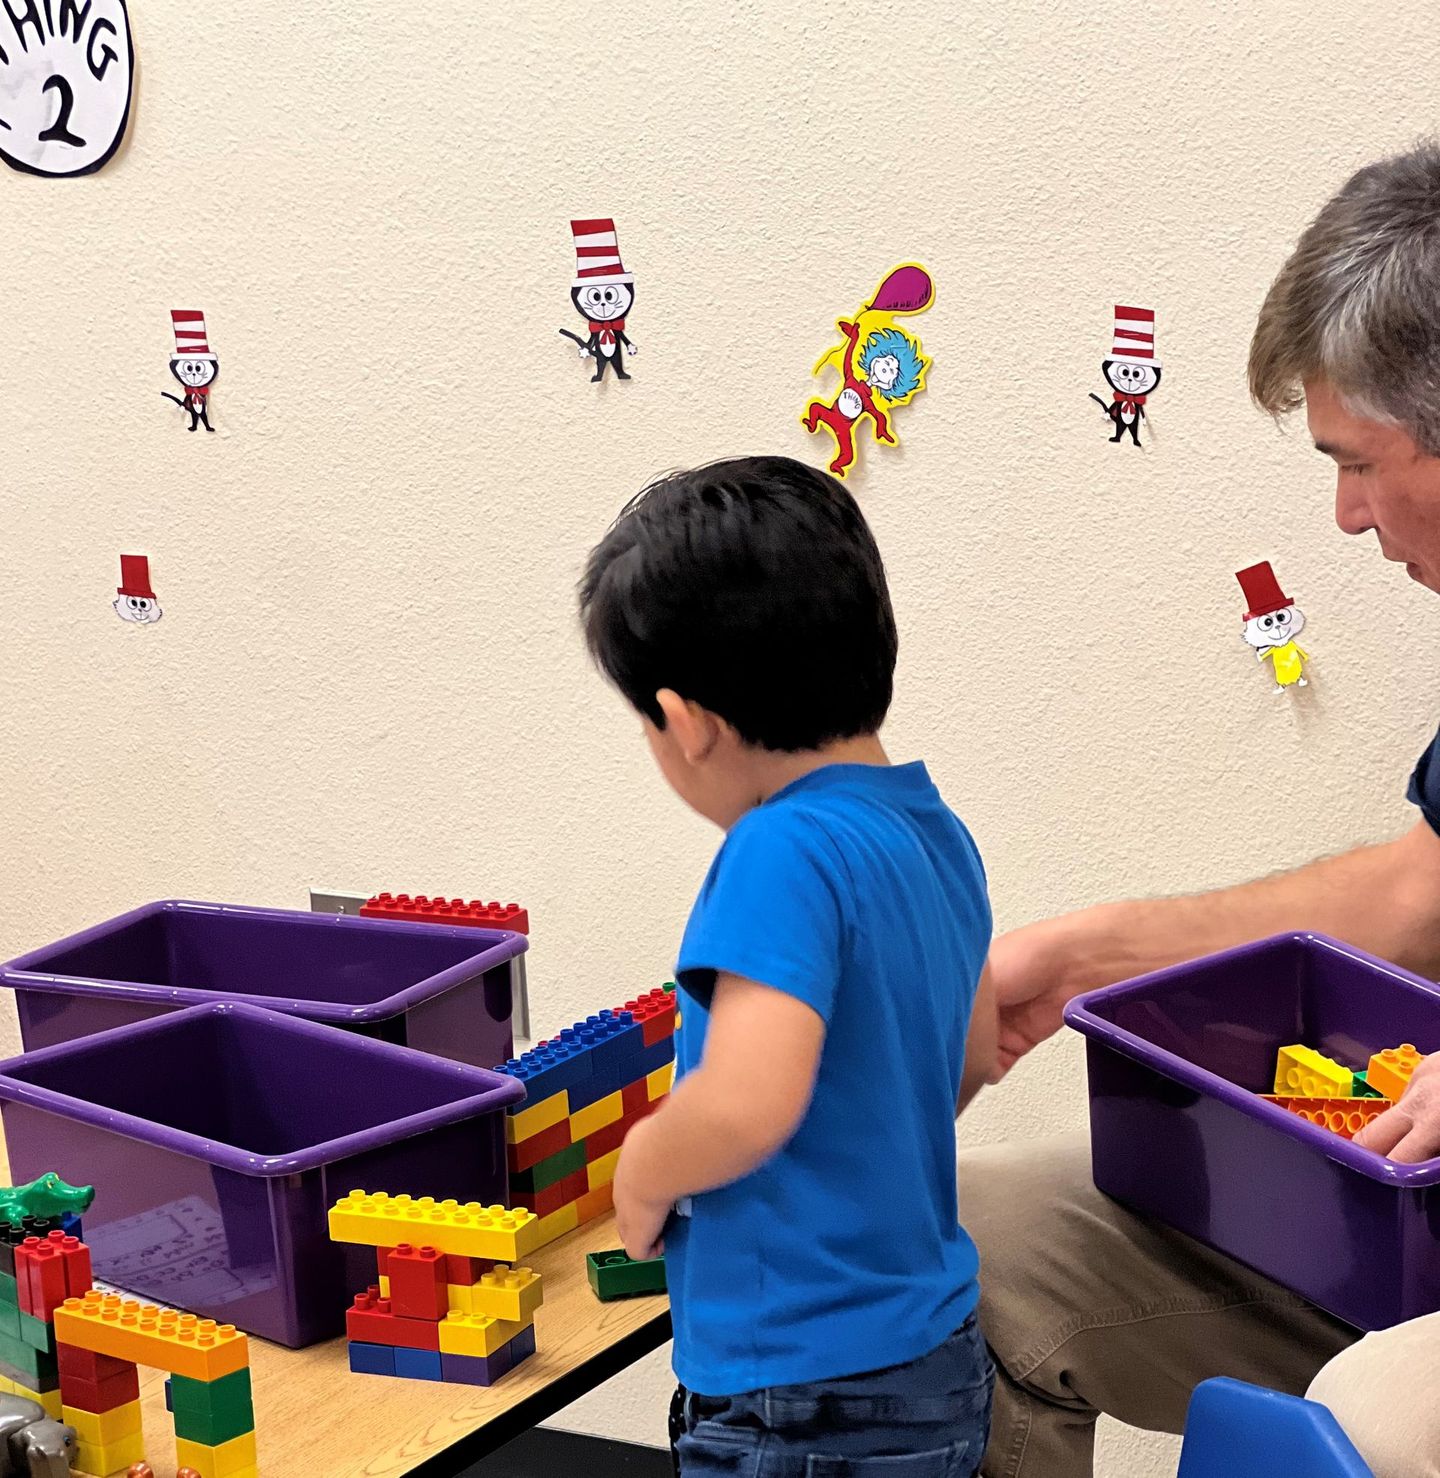 a man and a child are playing with lego blocks on a table